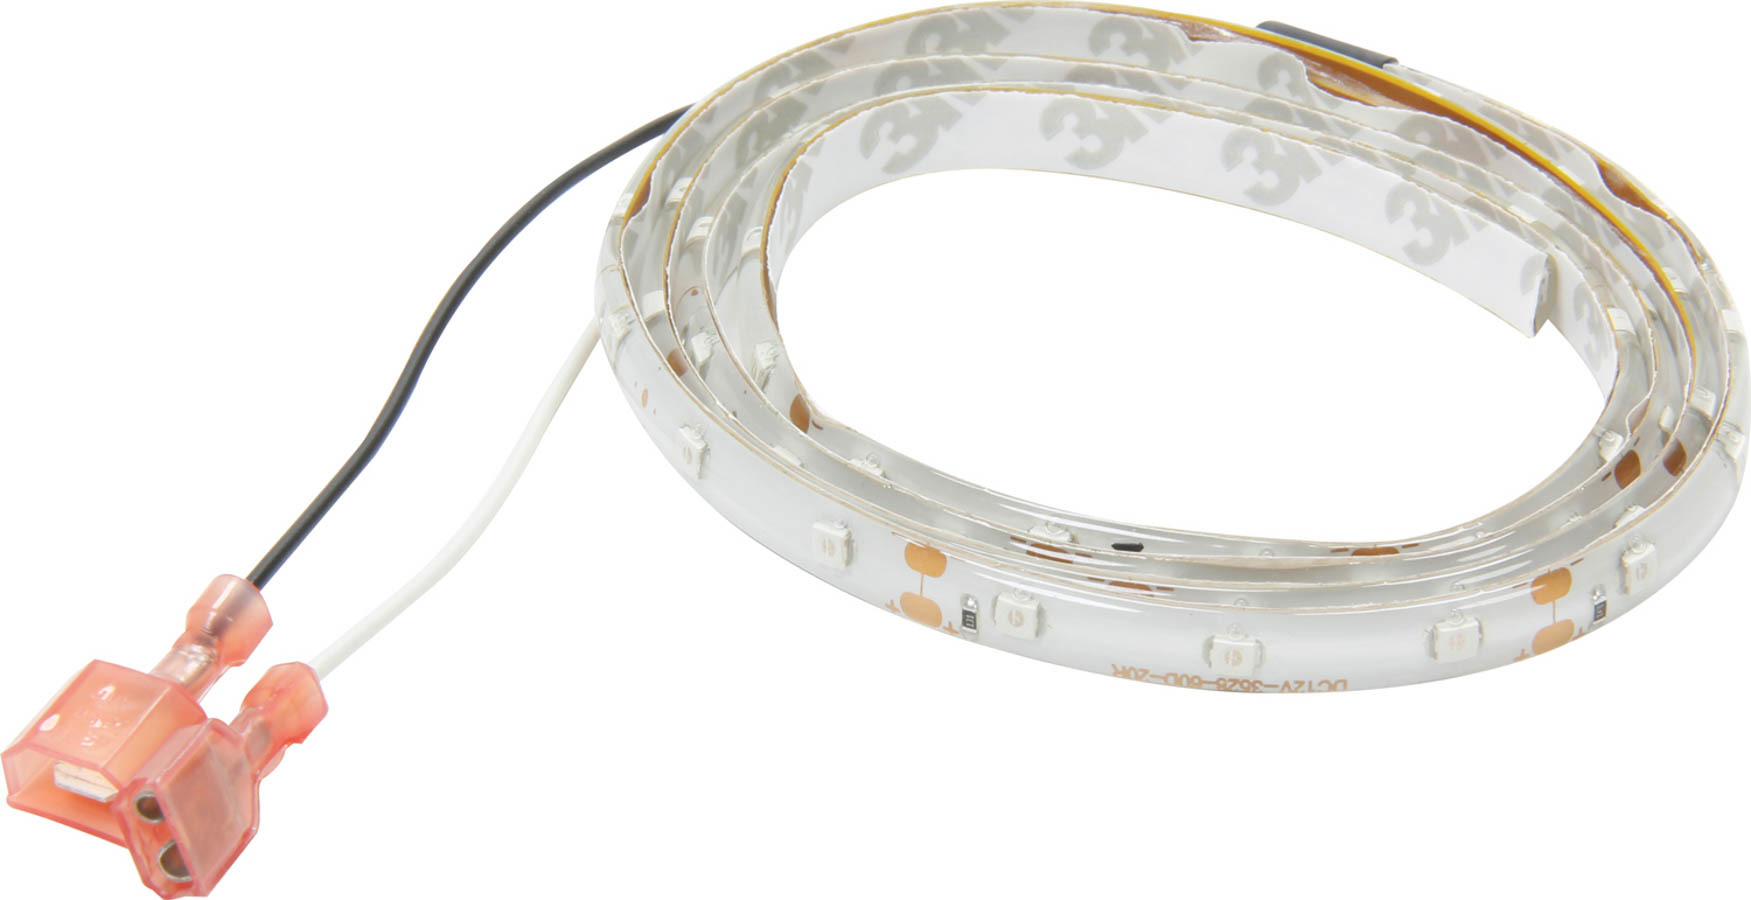 QuickCar 61-9790 - Light Strip, LED, 18 in Long, Connectors, Red, Universal, Each